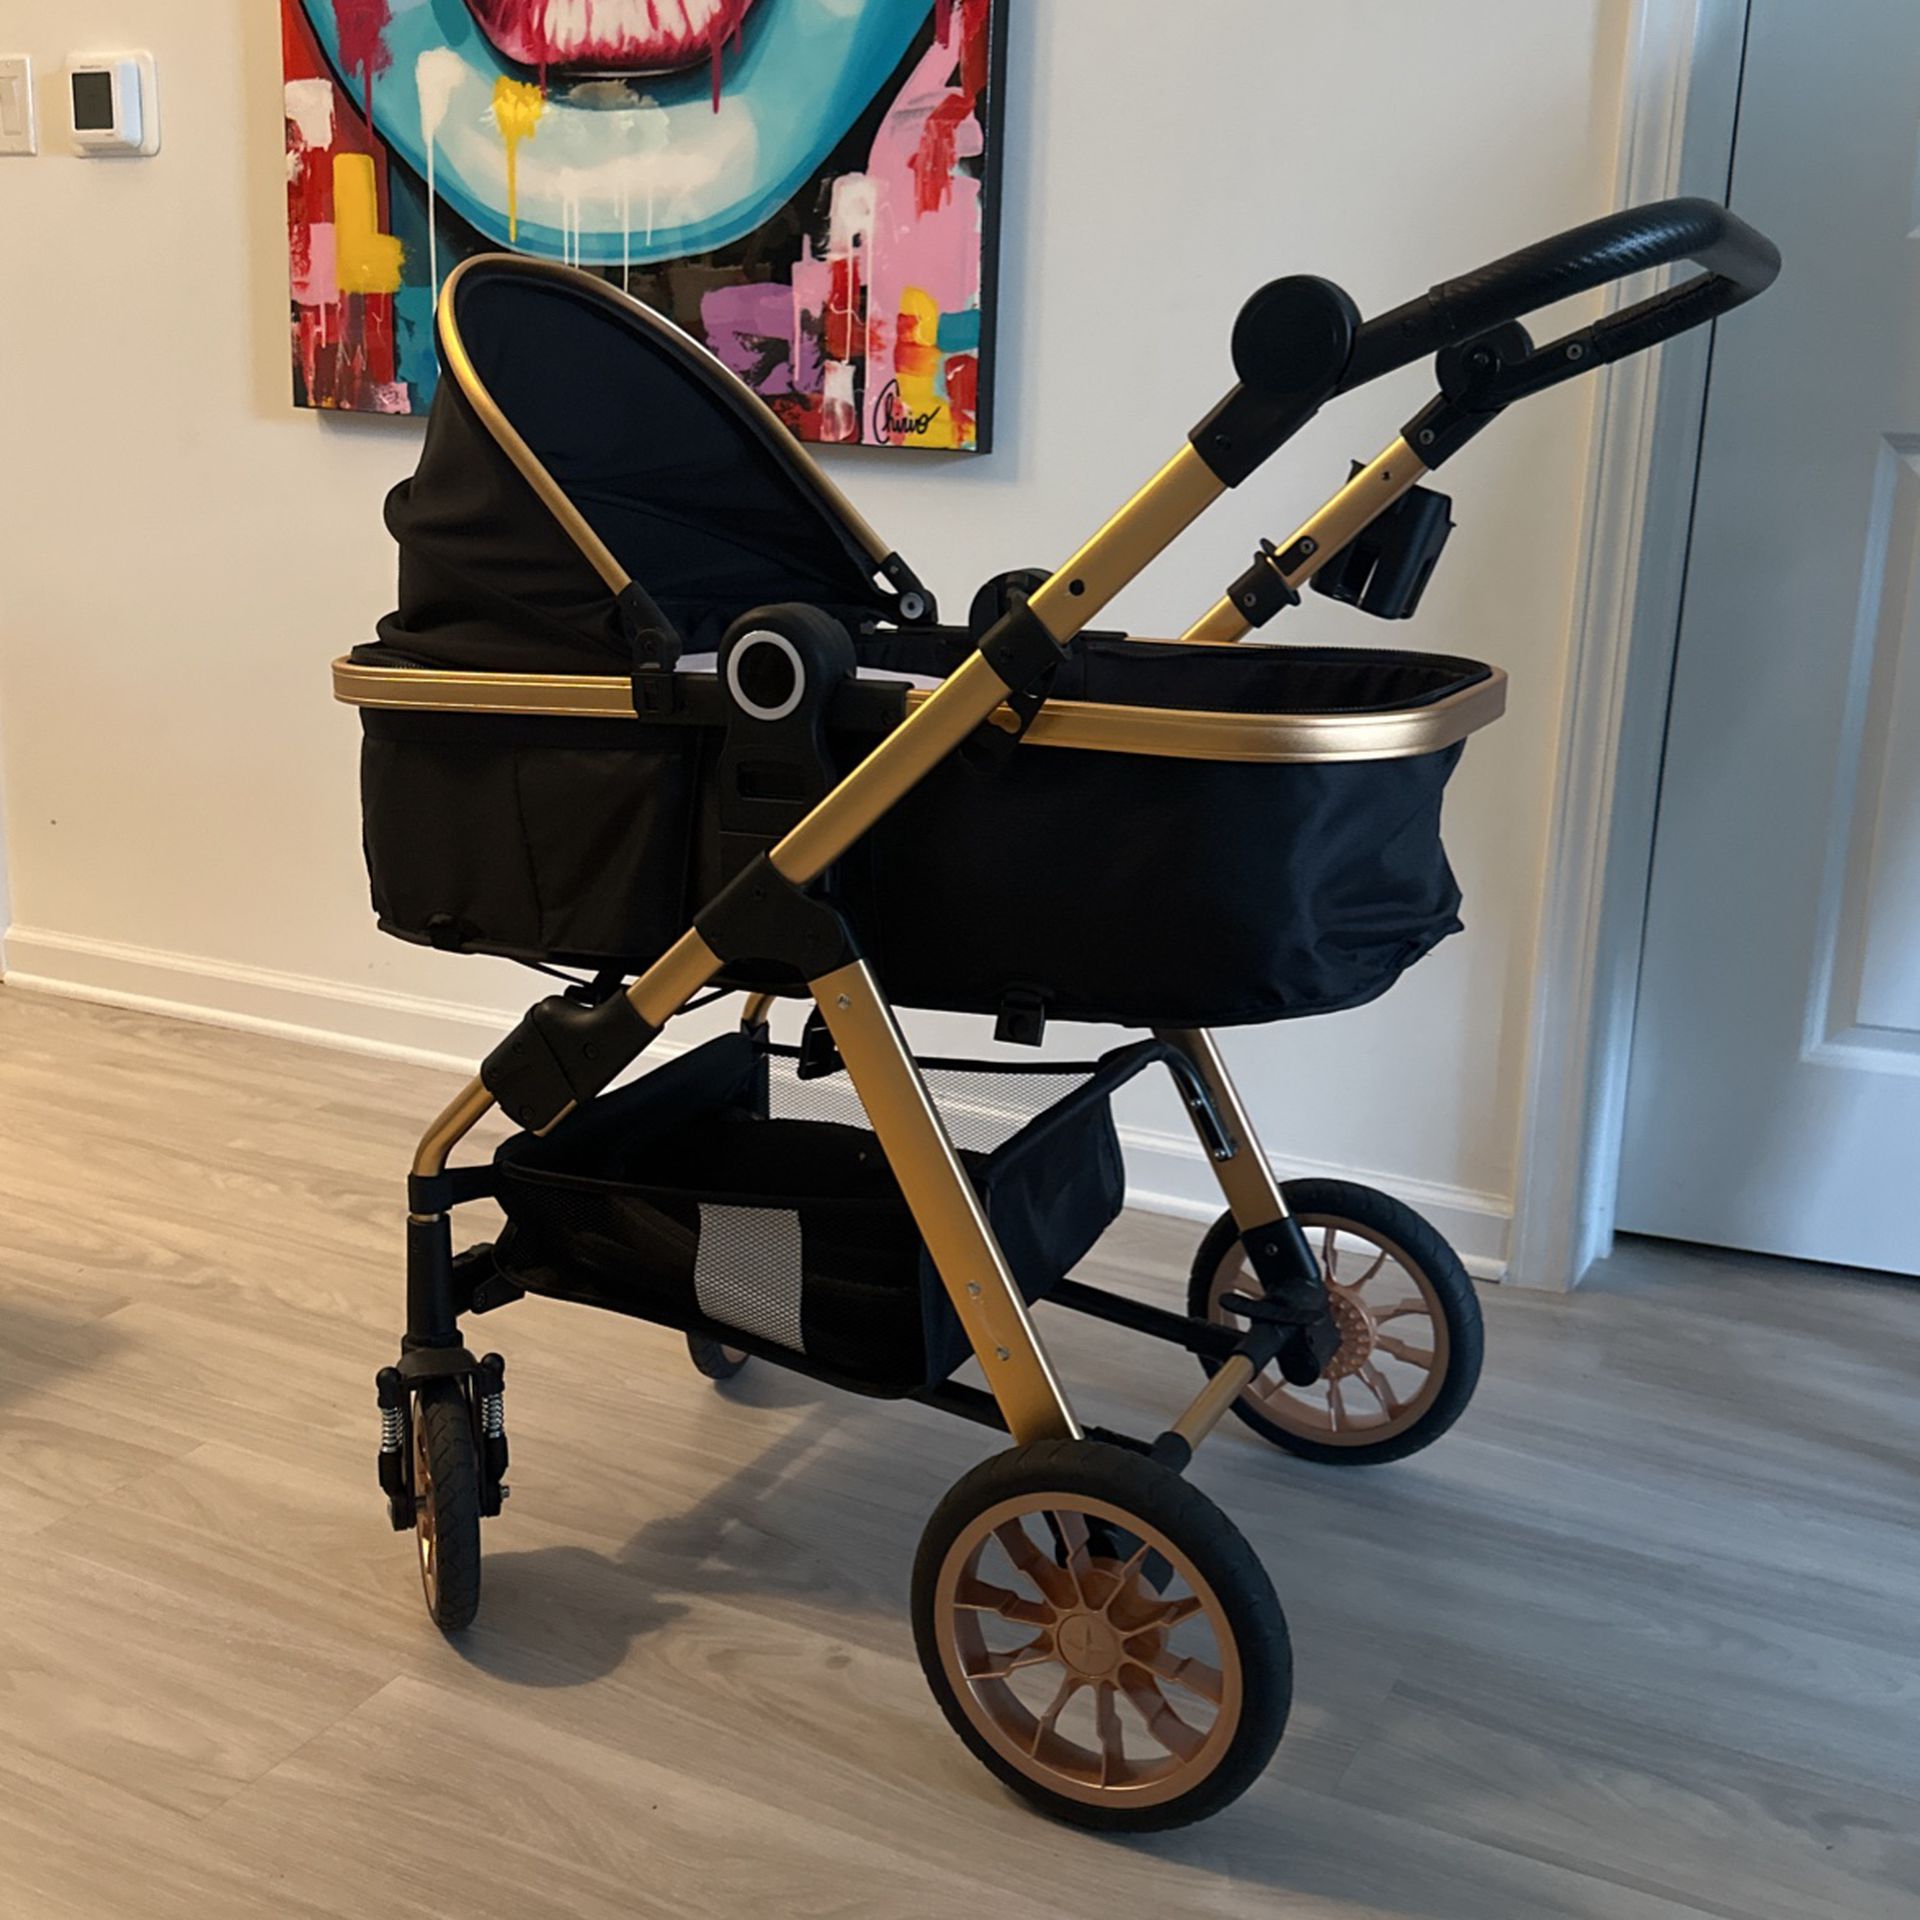 Baby Stroller Brand New. Good Condition. Barley Used 